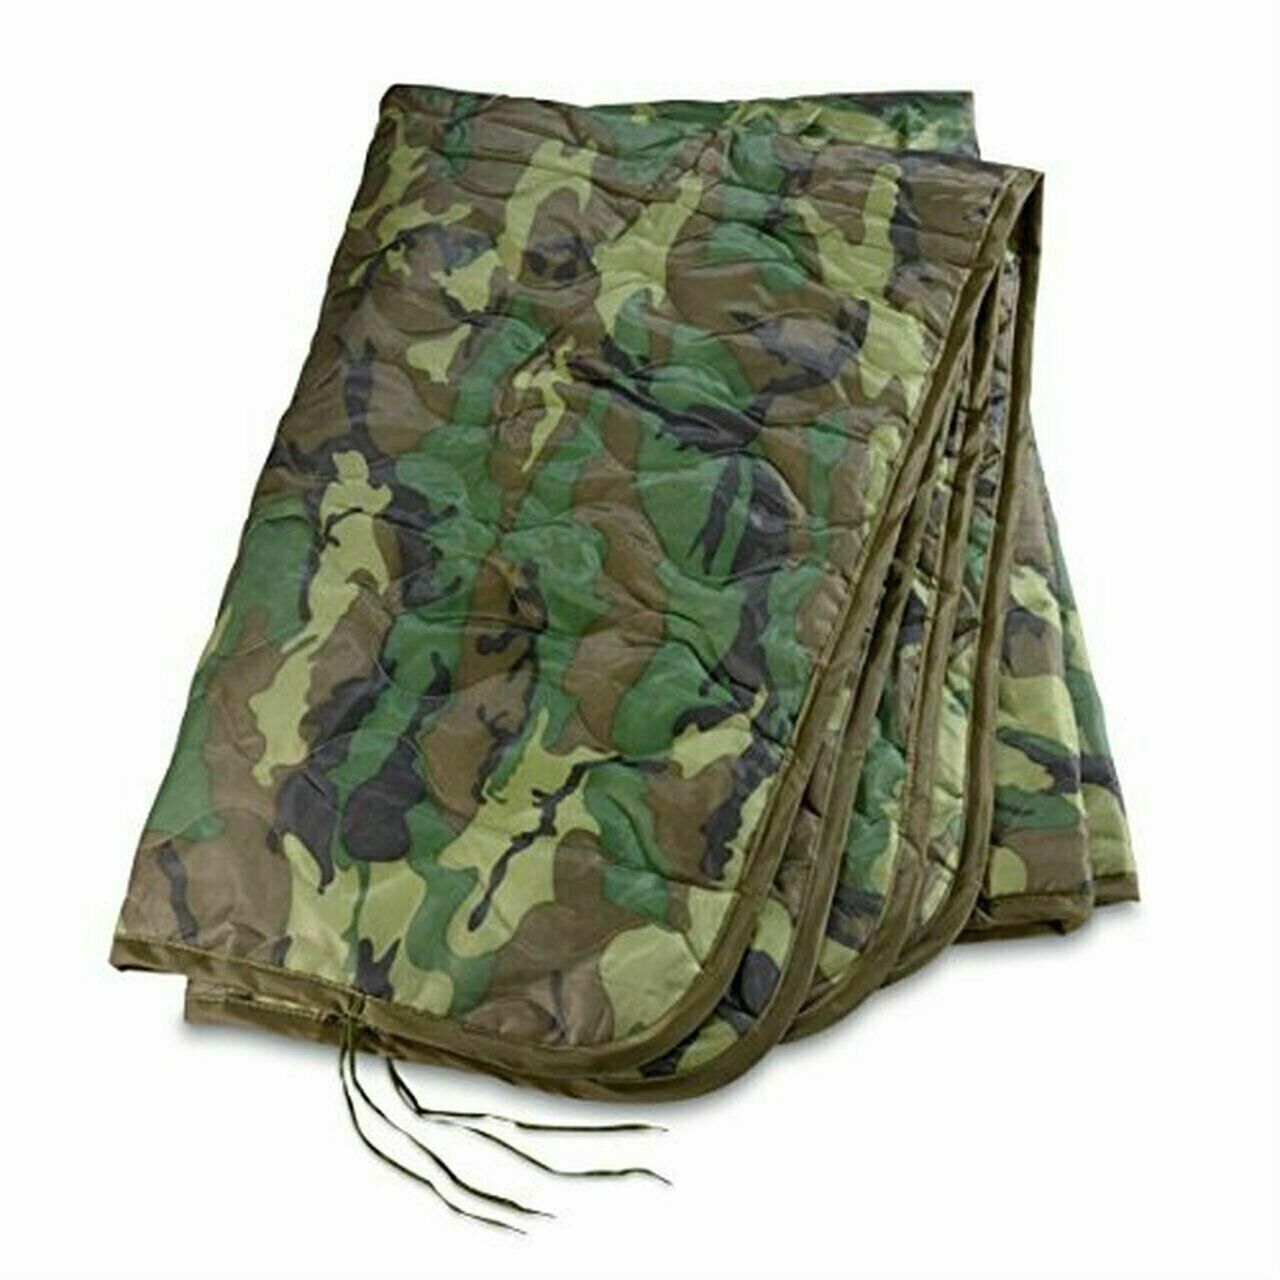 New Military G.I issue Poncho Liner Woodland Camouflage Woobie Blanket USA Made